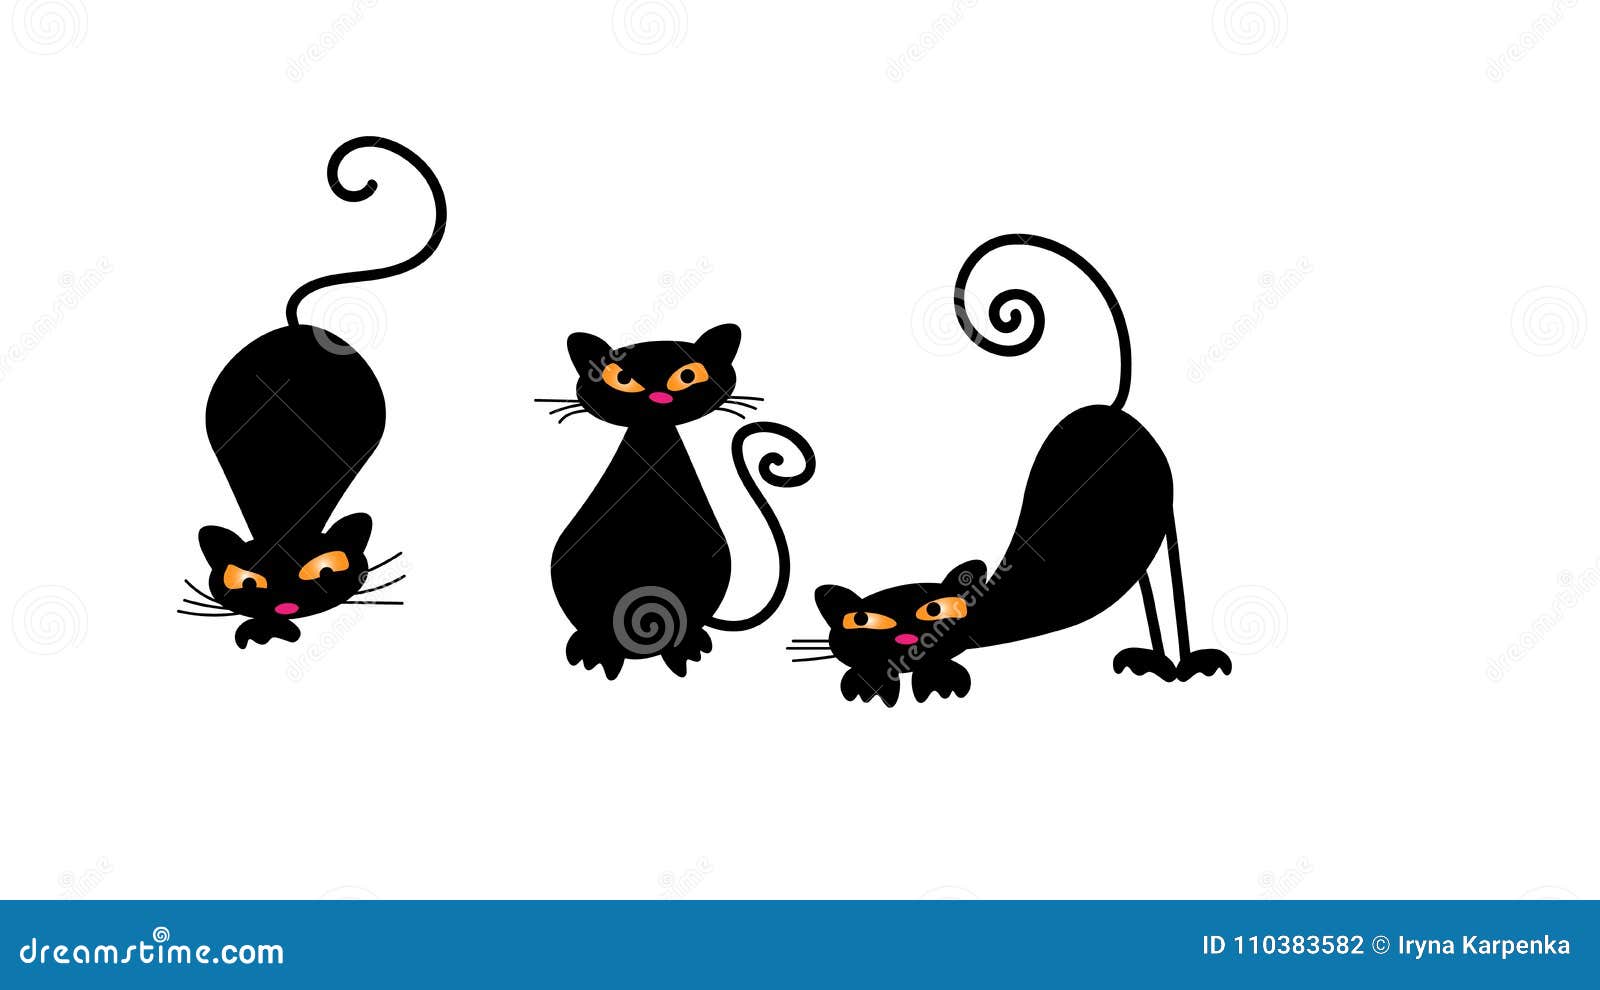 Vector Image of Black Cats in Different Poses. Black Cat Stock Vector ...